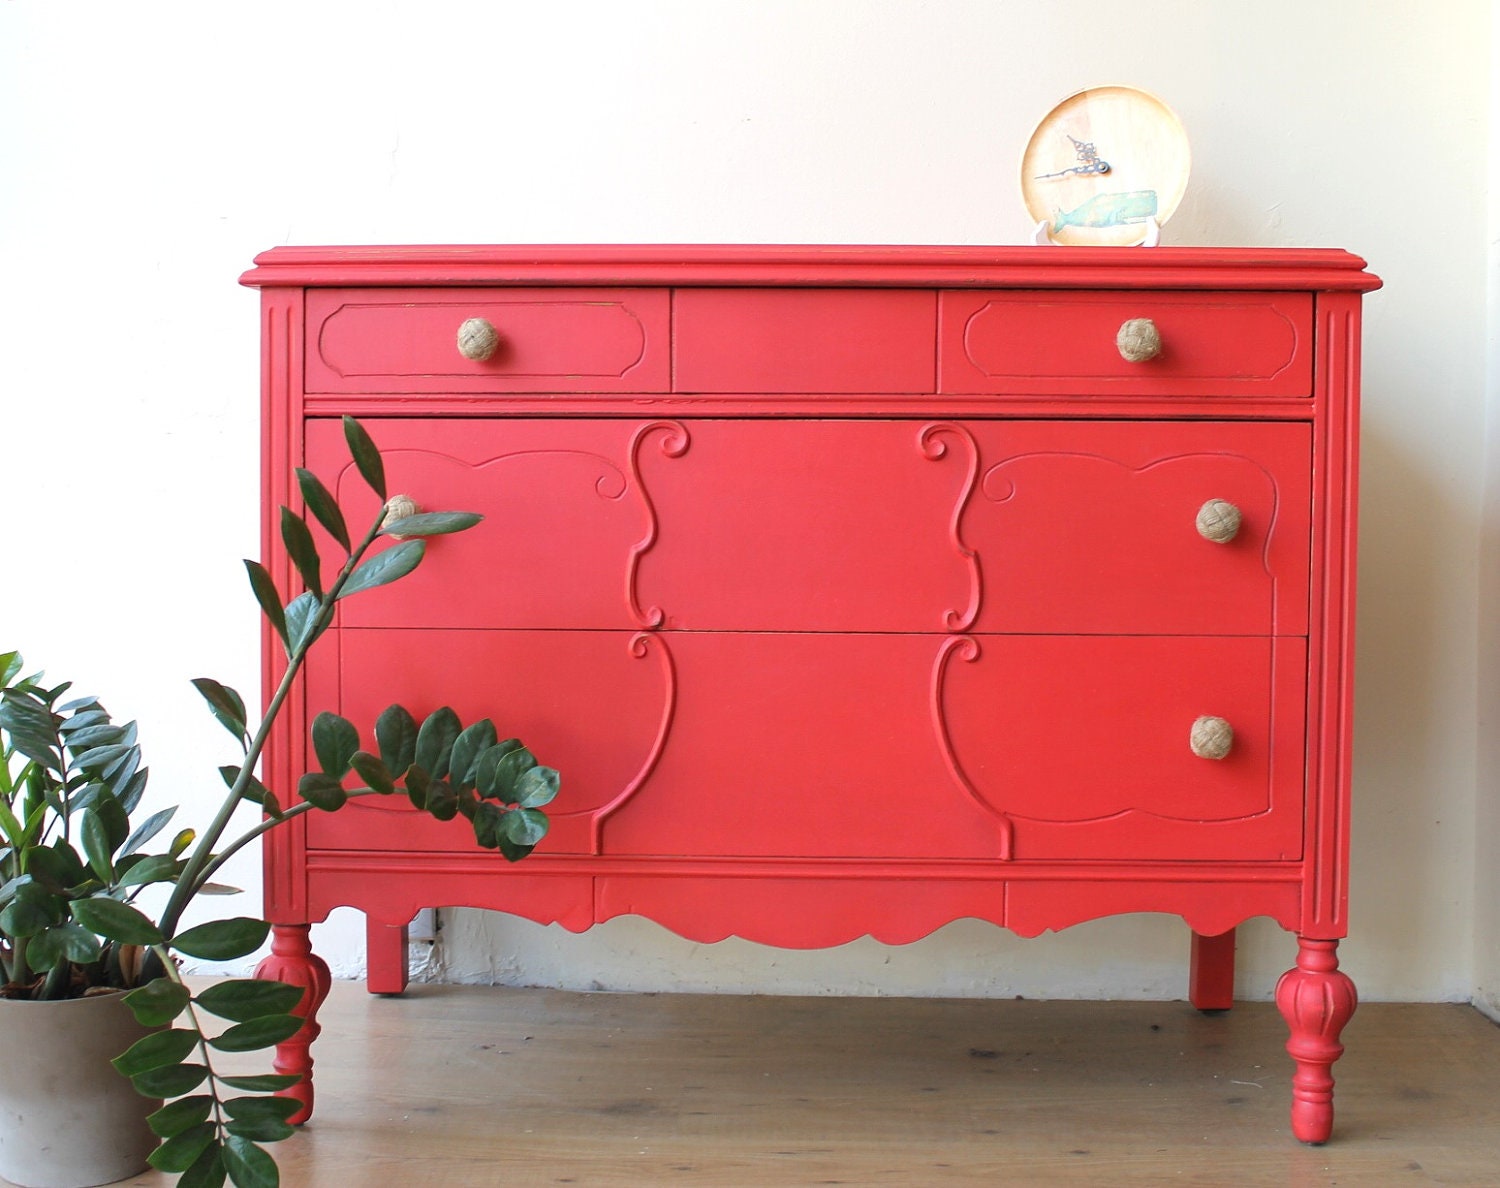 Coral Painted Dresser 28 Images 837 Best Images About Pink